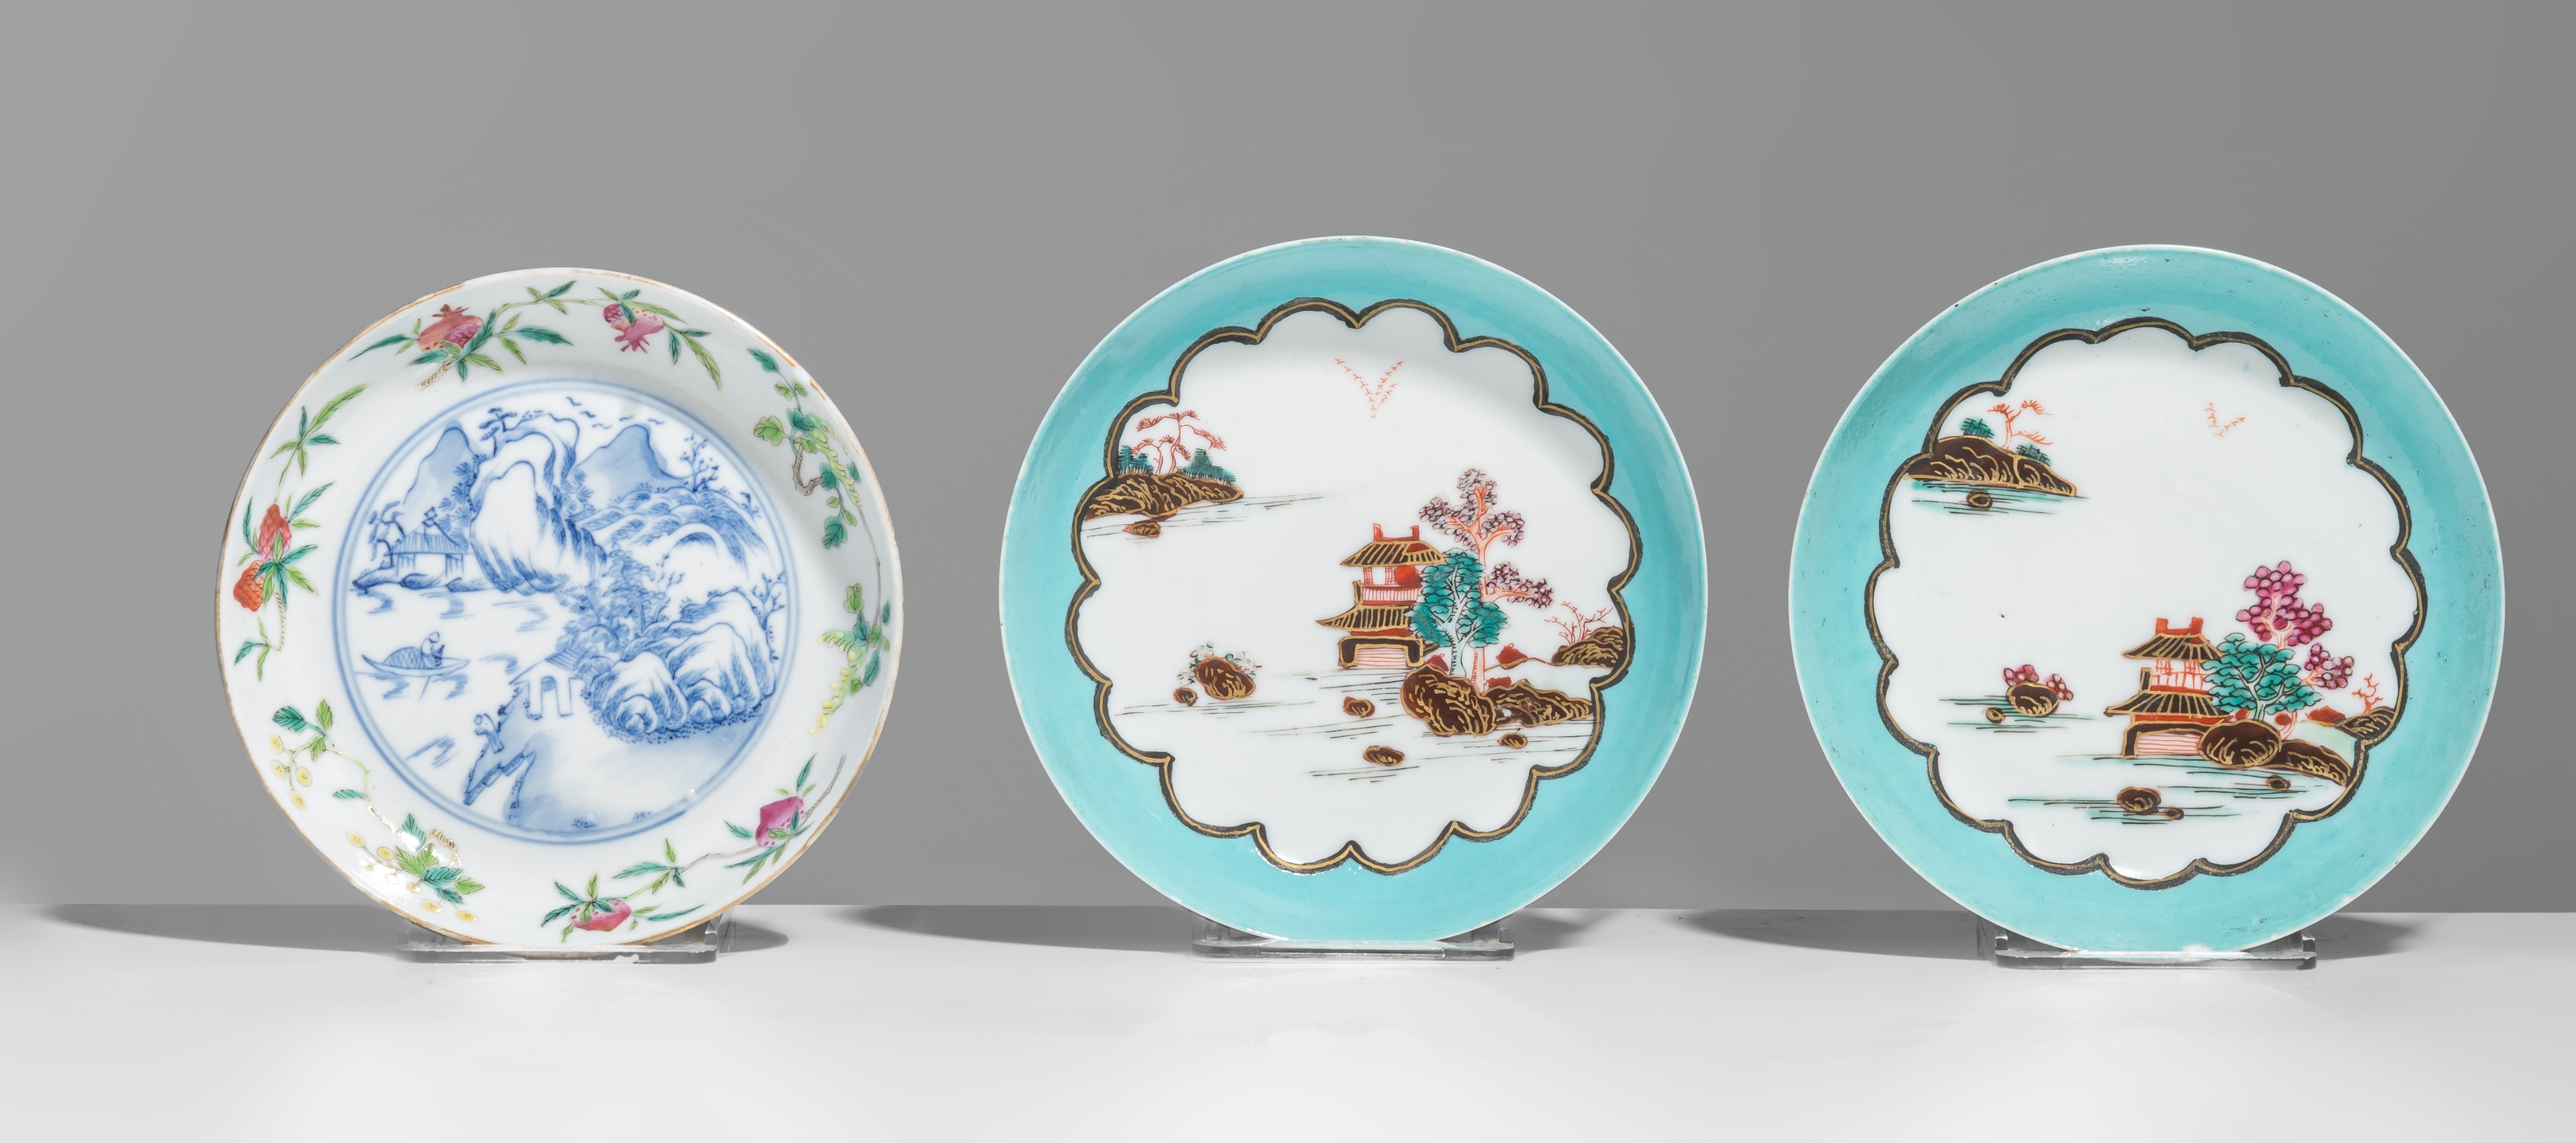 Two rare sets of Meissen-inspired Chinese export porcelain cups and saucers, 18thC, tallest H 7,5 cm - Image 2 of 10